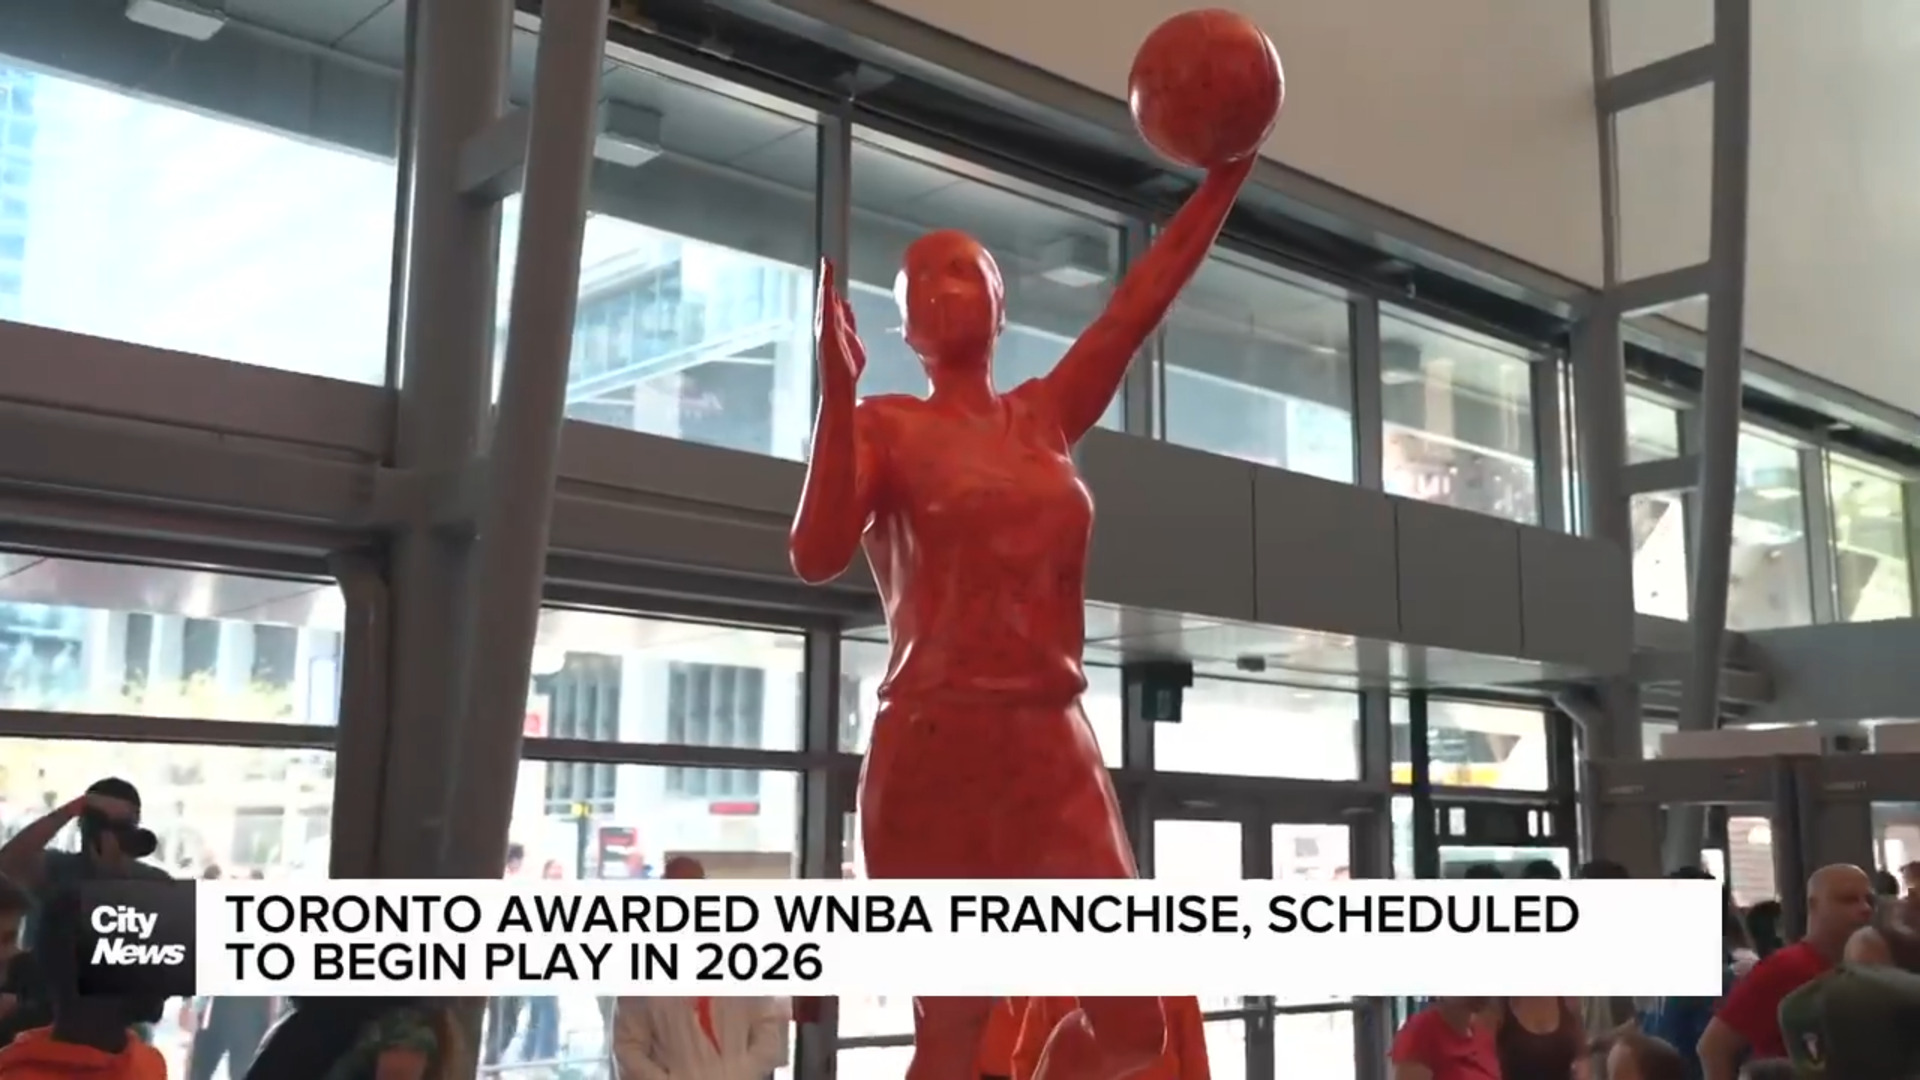 Toronto has been awarded a WNBA expansion franchise